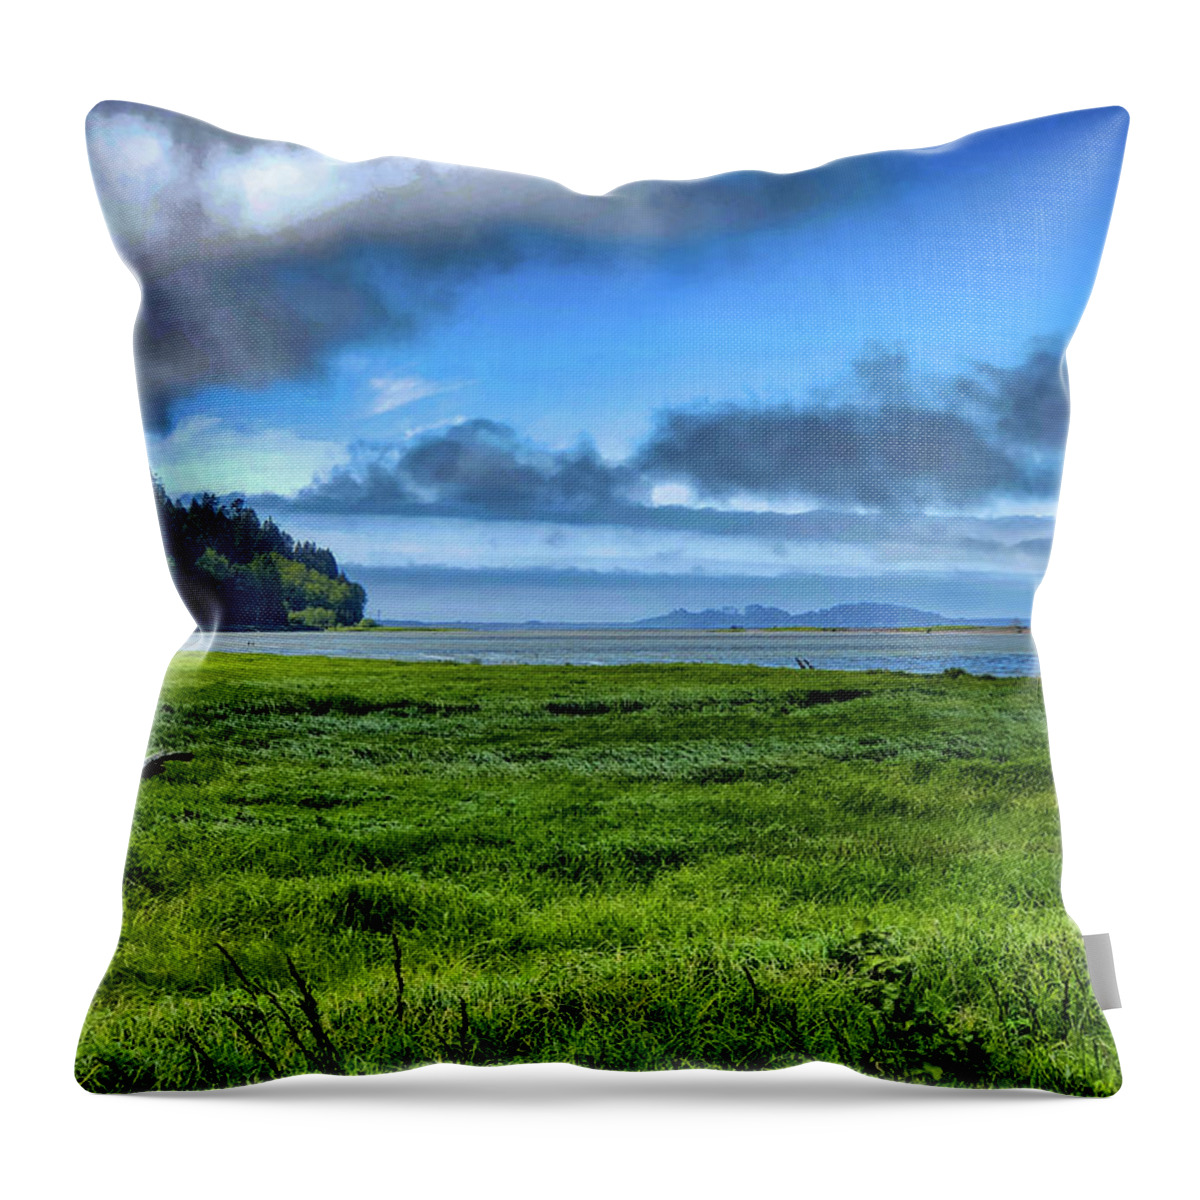 Landscape Throw Pillow featuring the digital art Green Reed Sea by Chriss Pagani